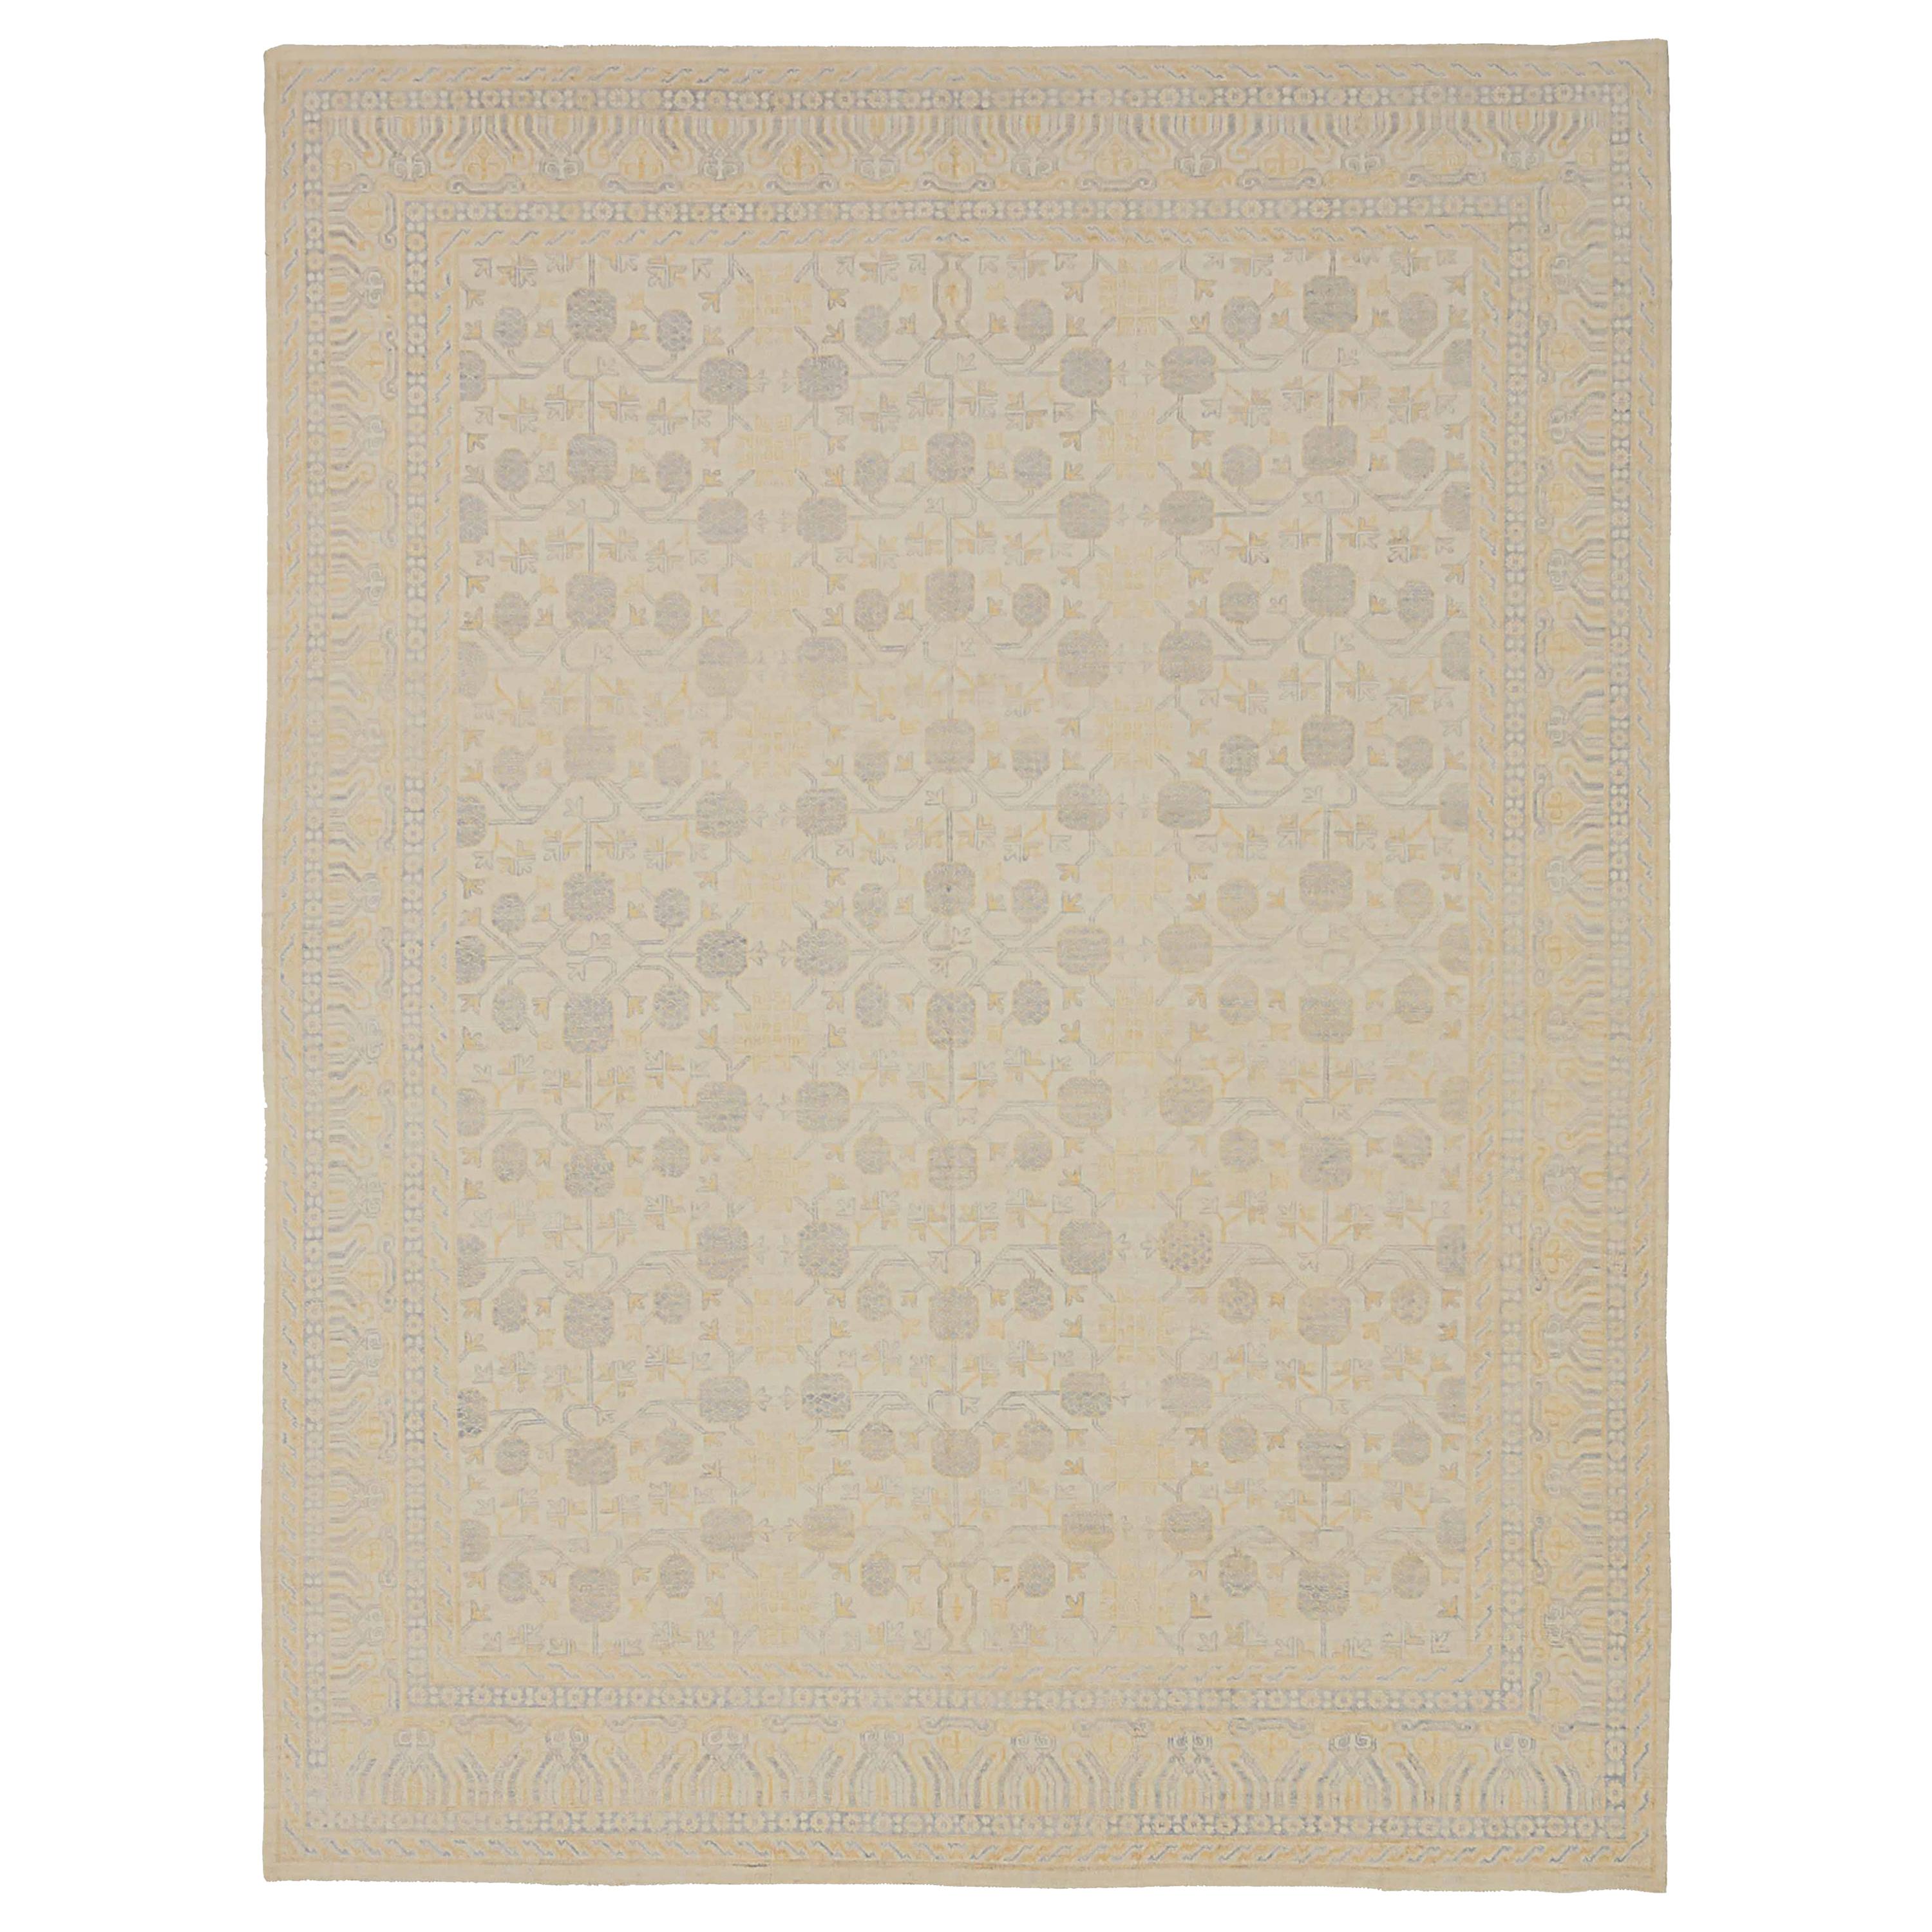 New Khotan Style Afghan Area Rug with '17th-Century' Look